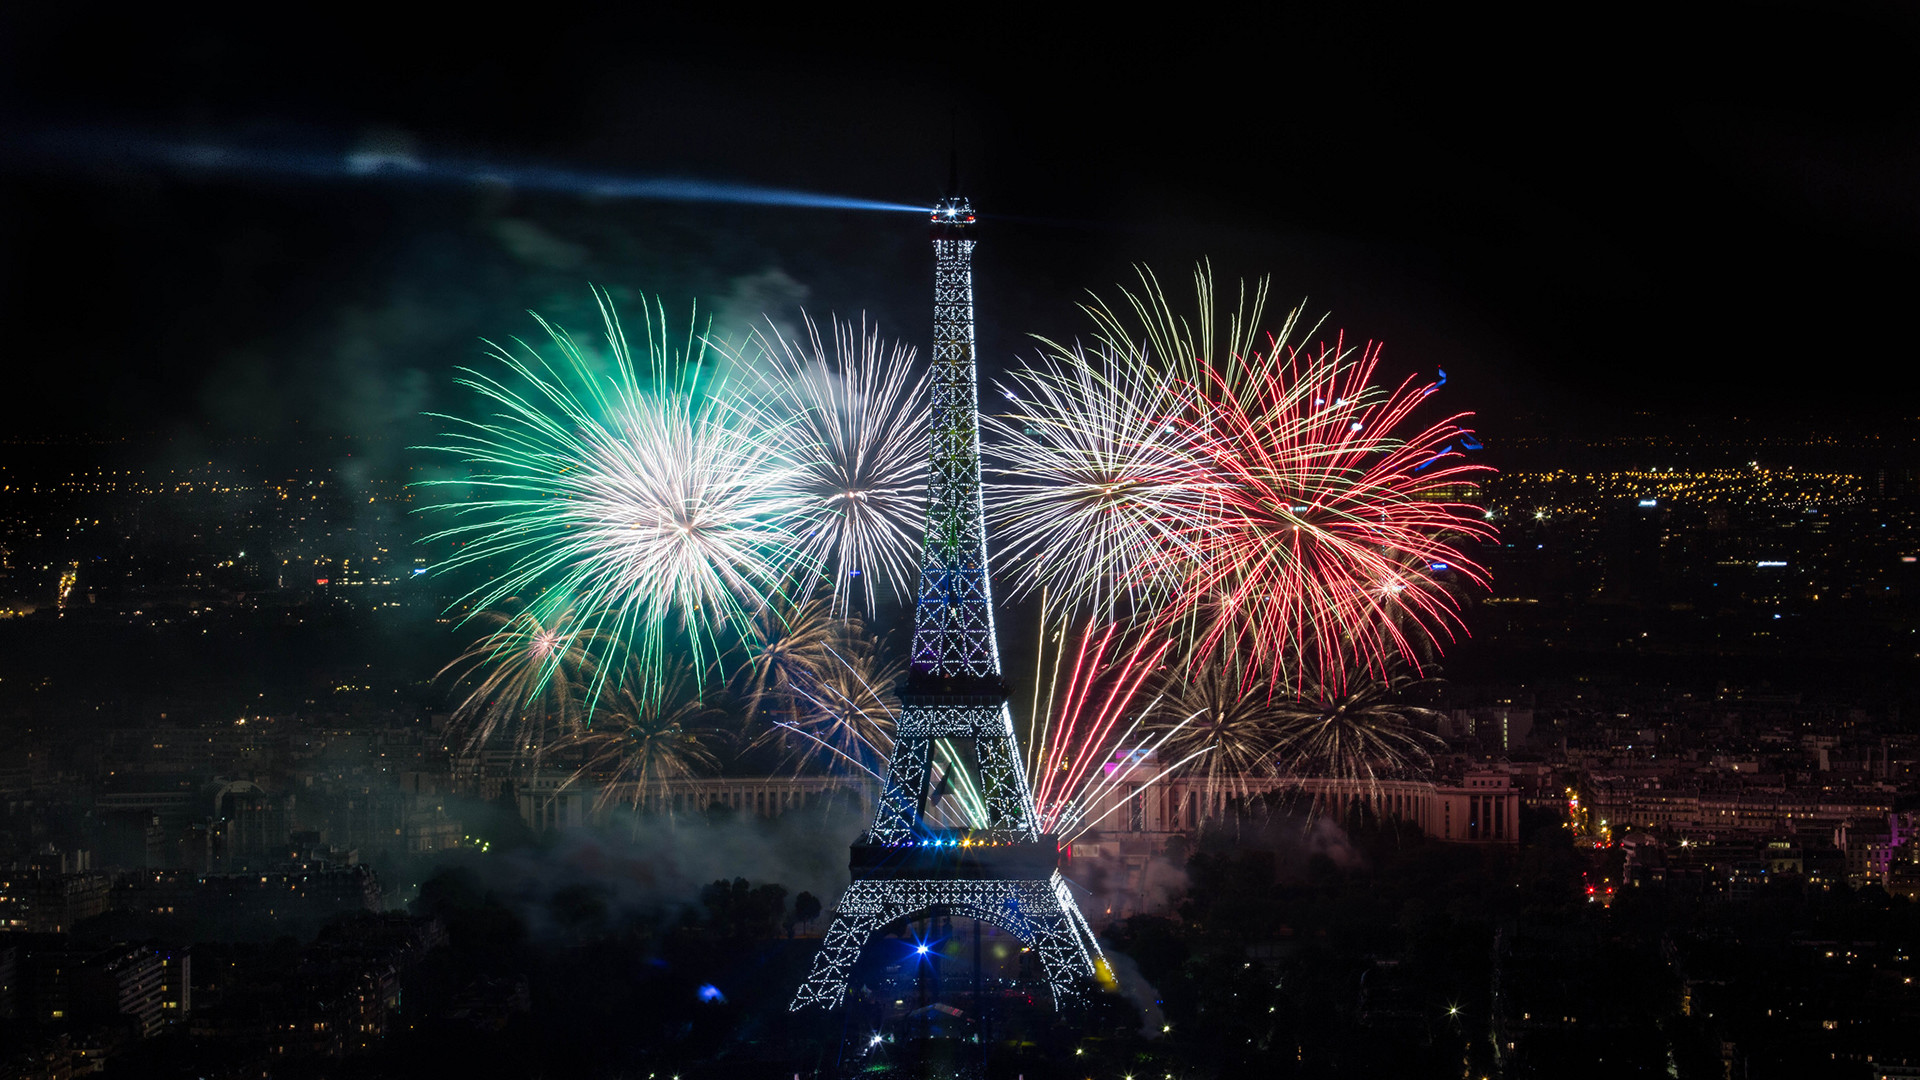 1920x1080 Eiffel Tower At Night With Fireworks Wallpaper